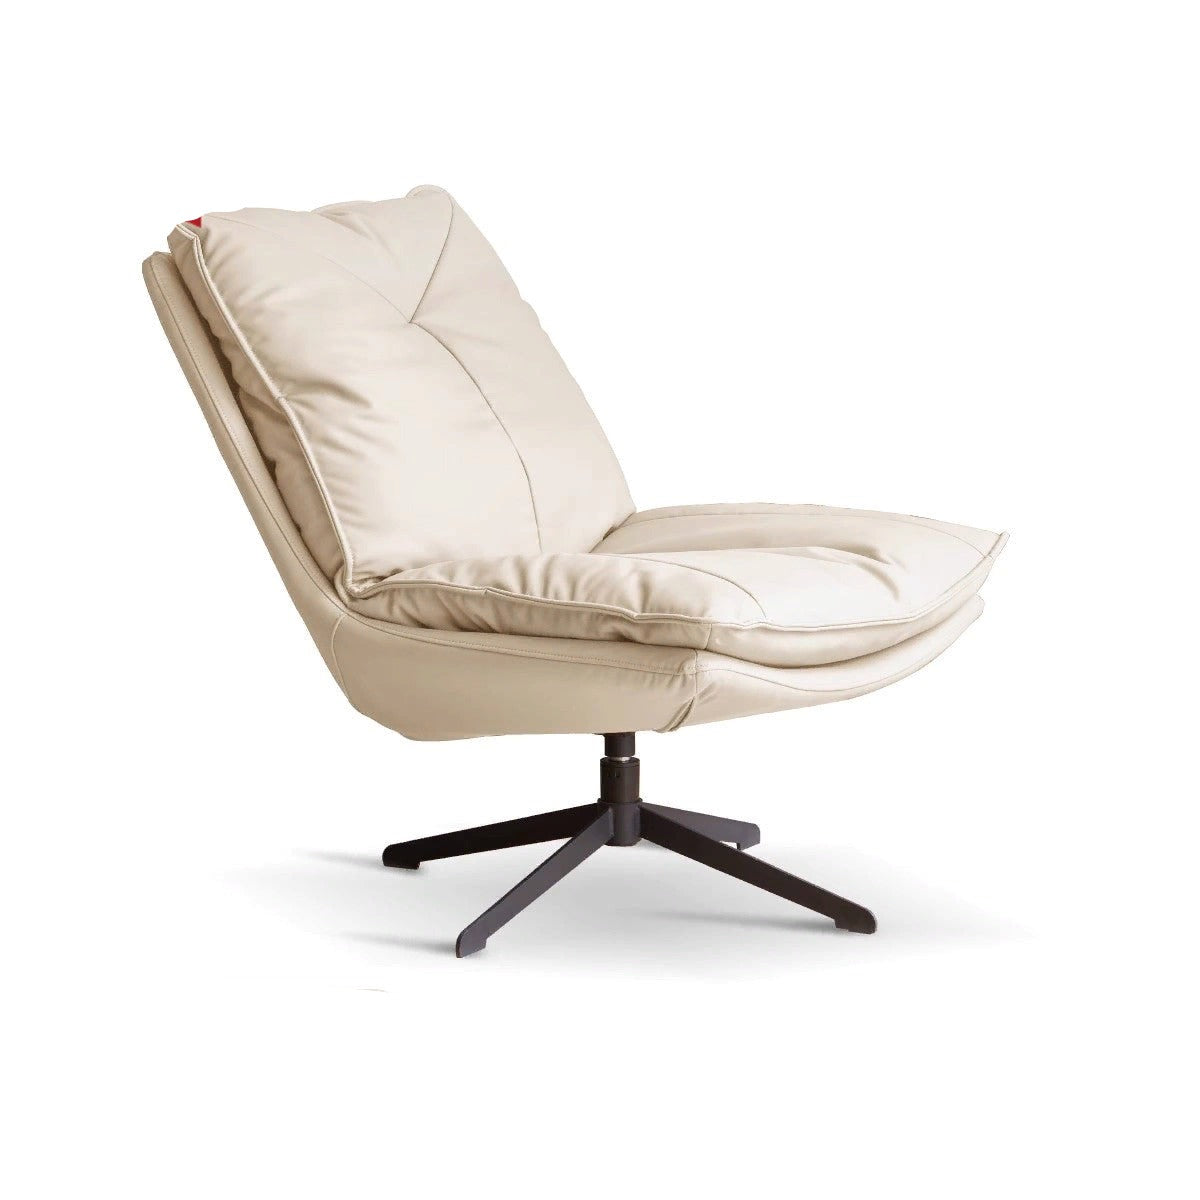 360° Organic Leather Recliner"